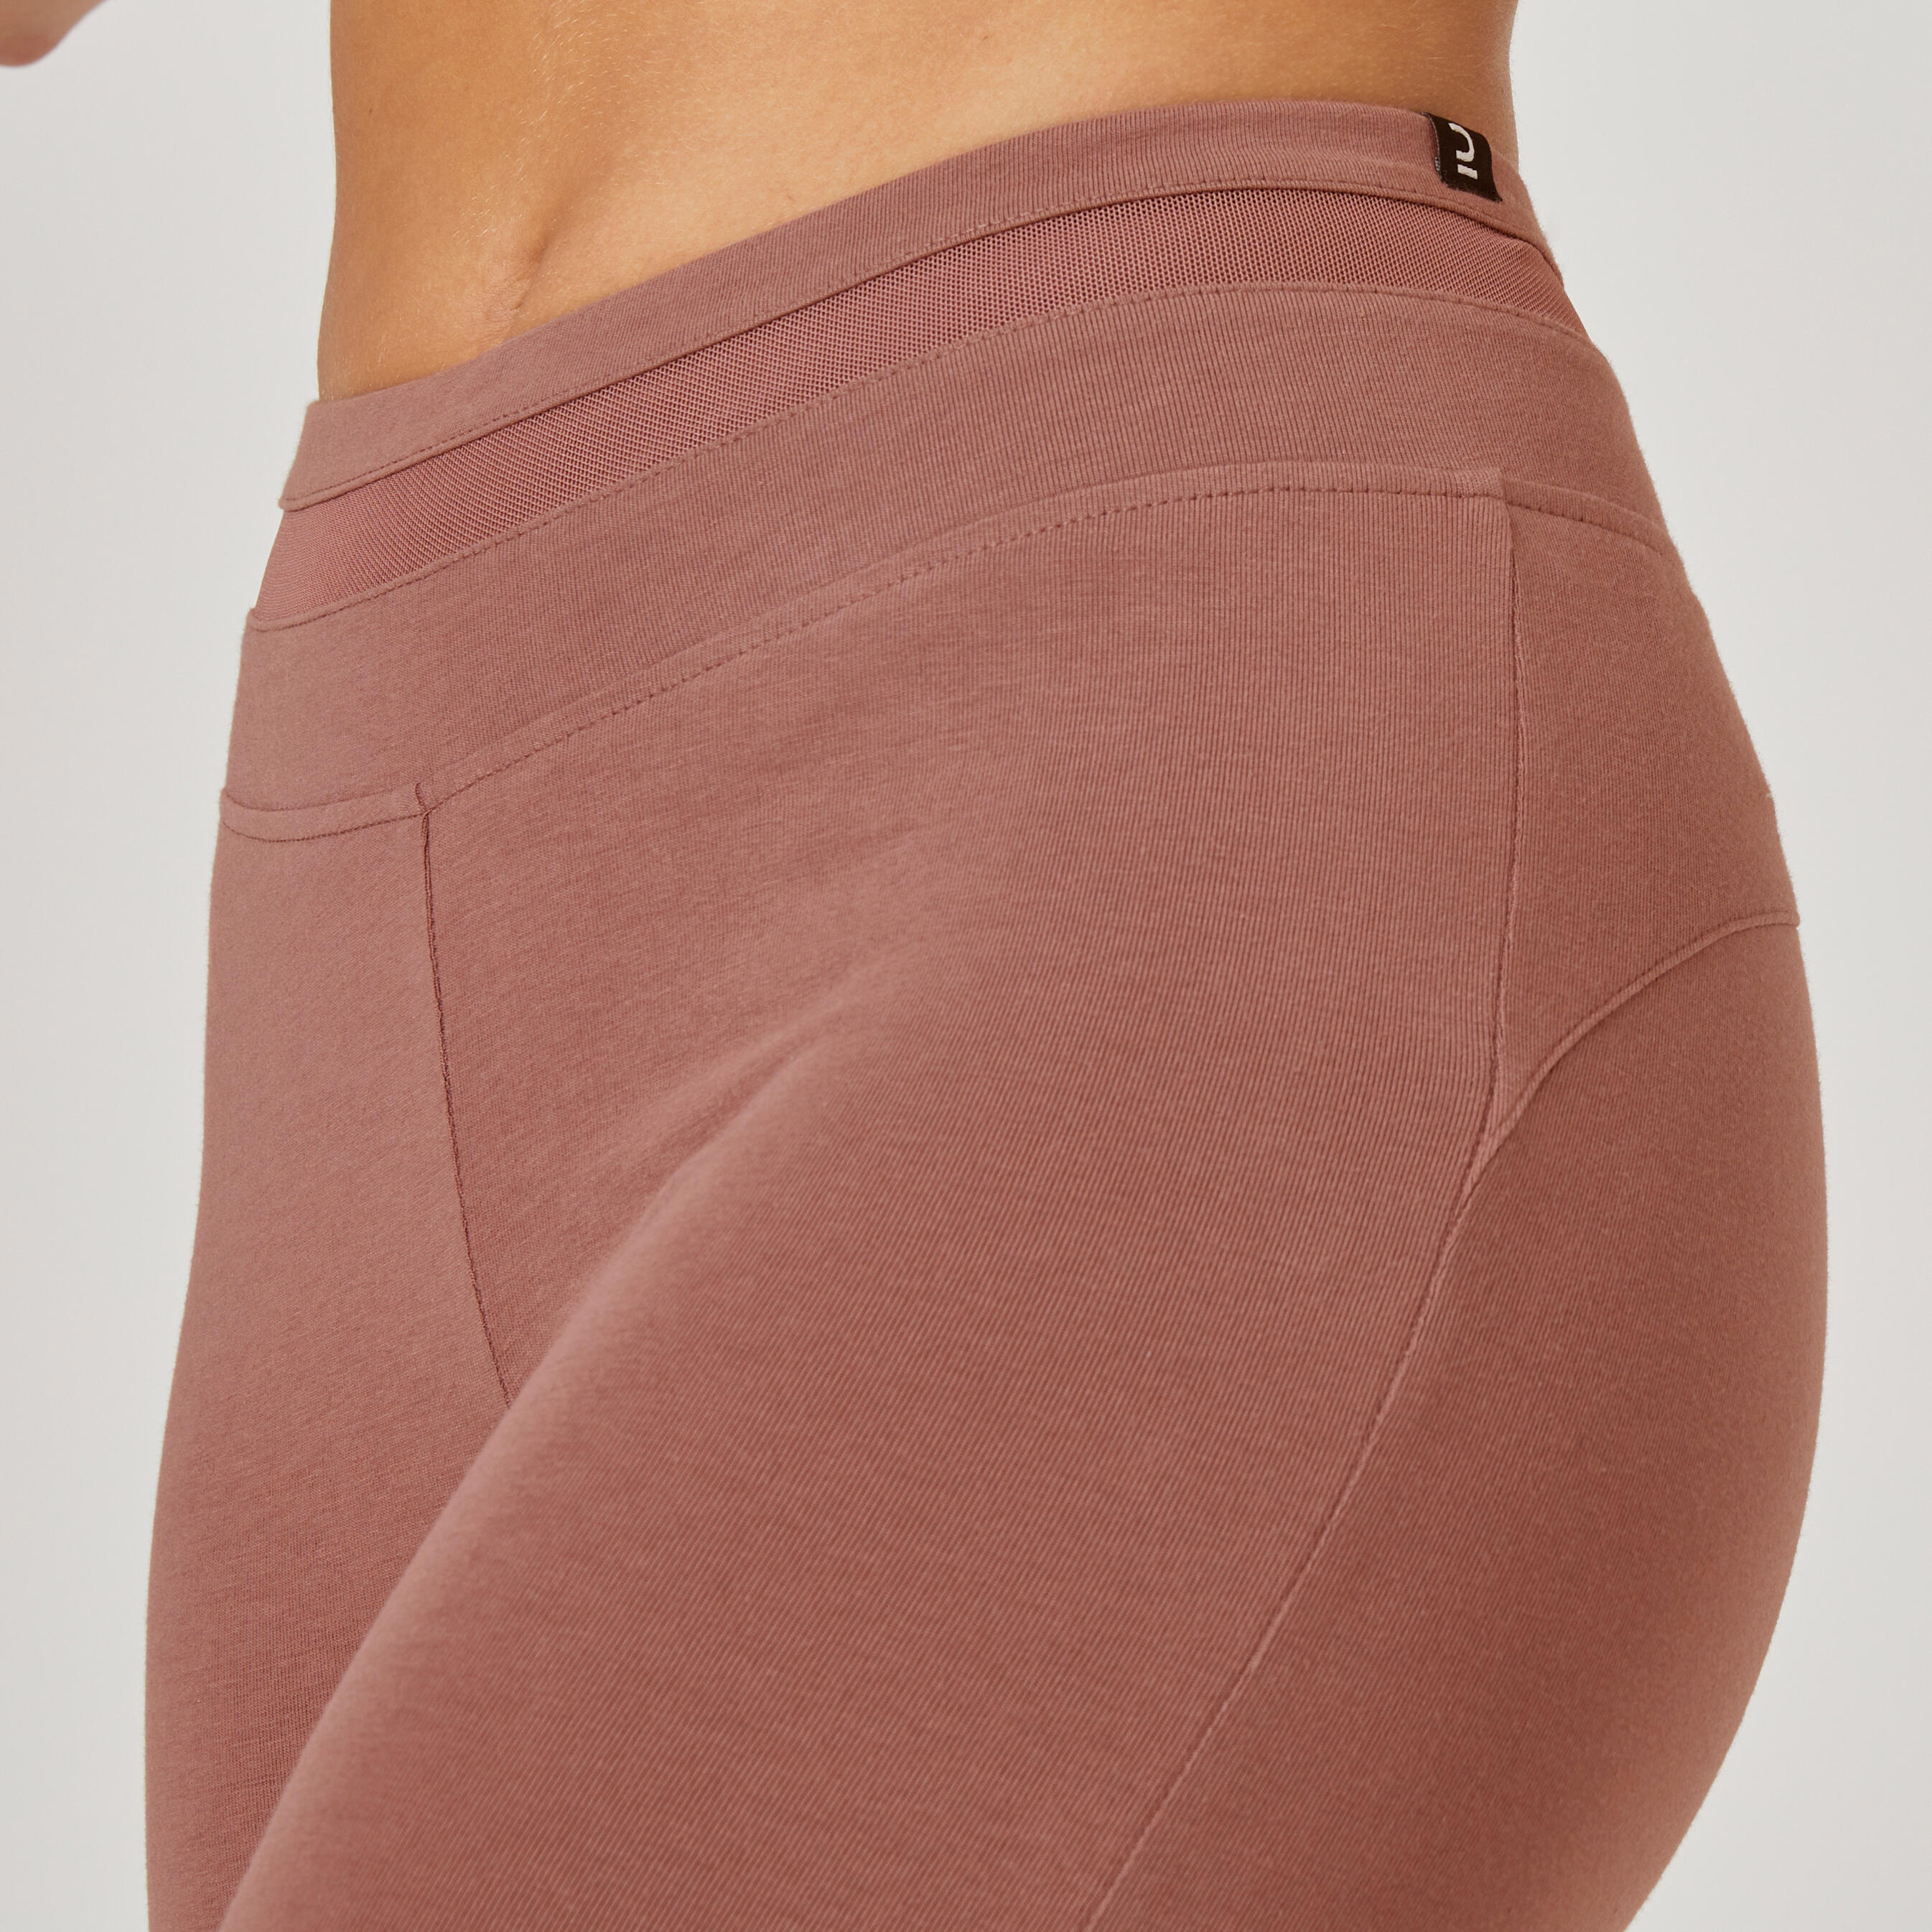 Slim-Fit Fitness Cropped Bottoms 520 - Purple 4/6